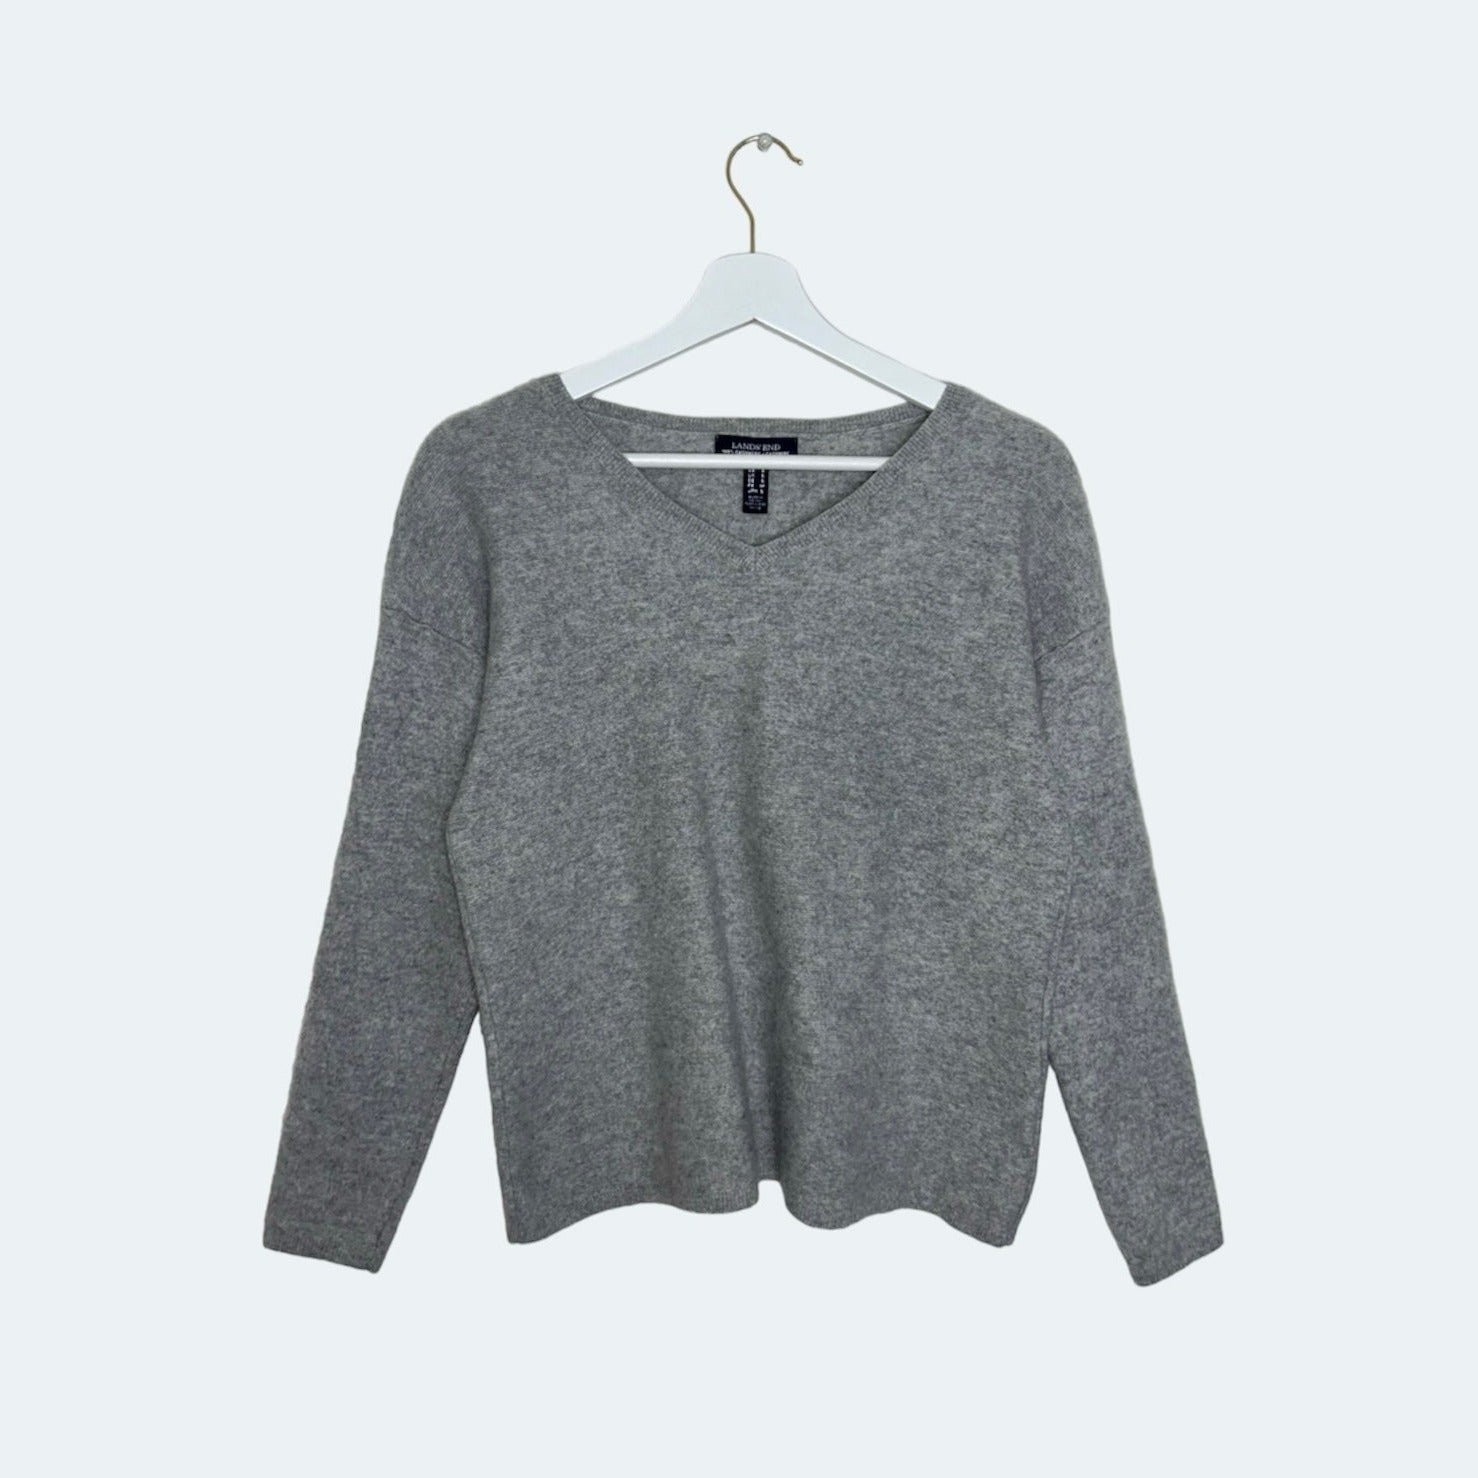 grey knit jumper shown on a white background